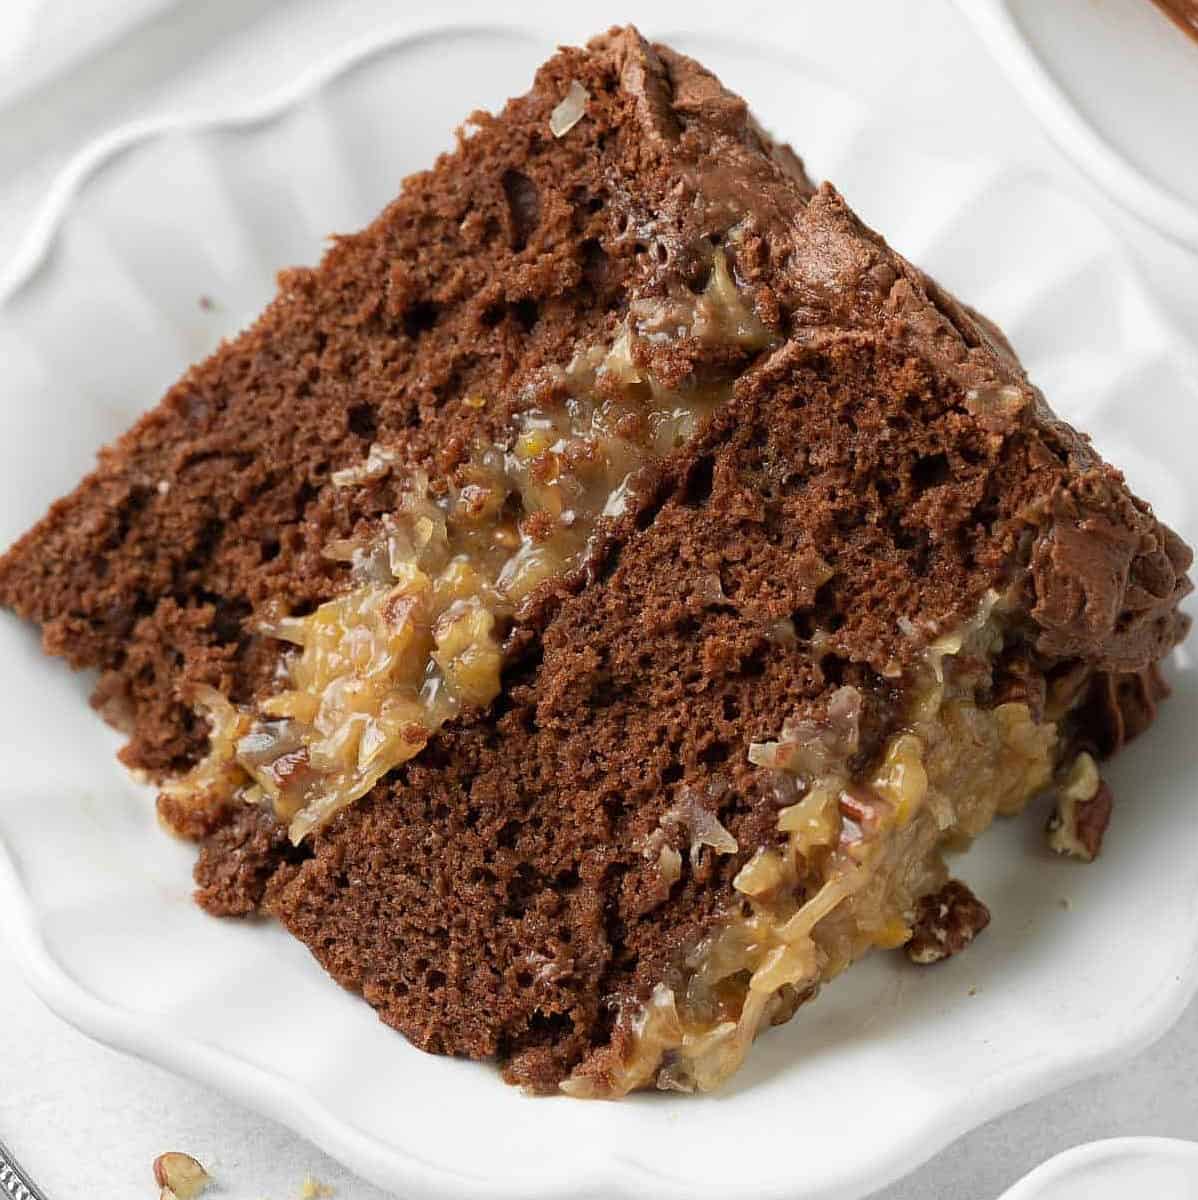  Indulge in this divine vegan German Chocolate Cake topped with a luscious coconut-pecan frosting!